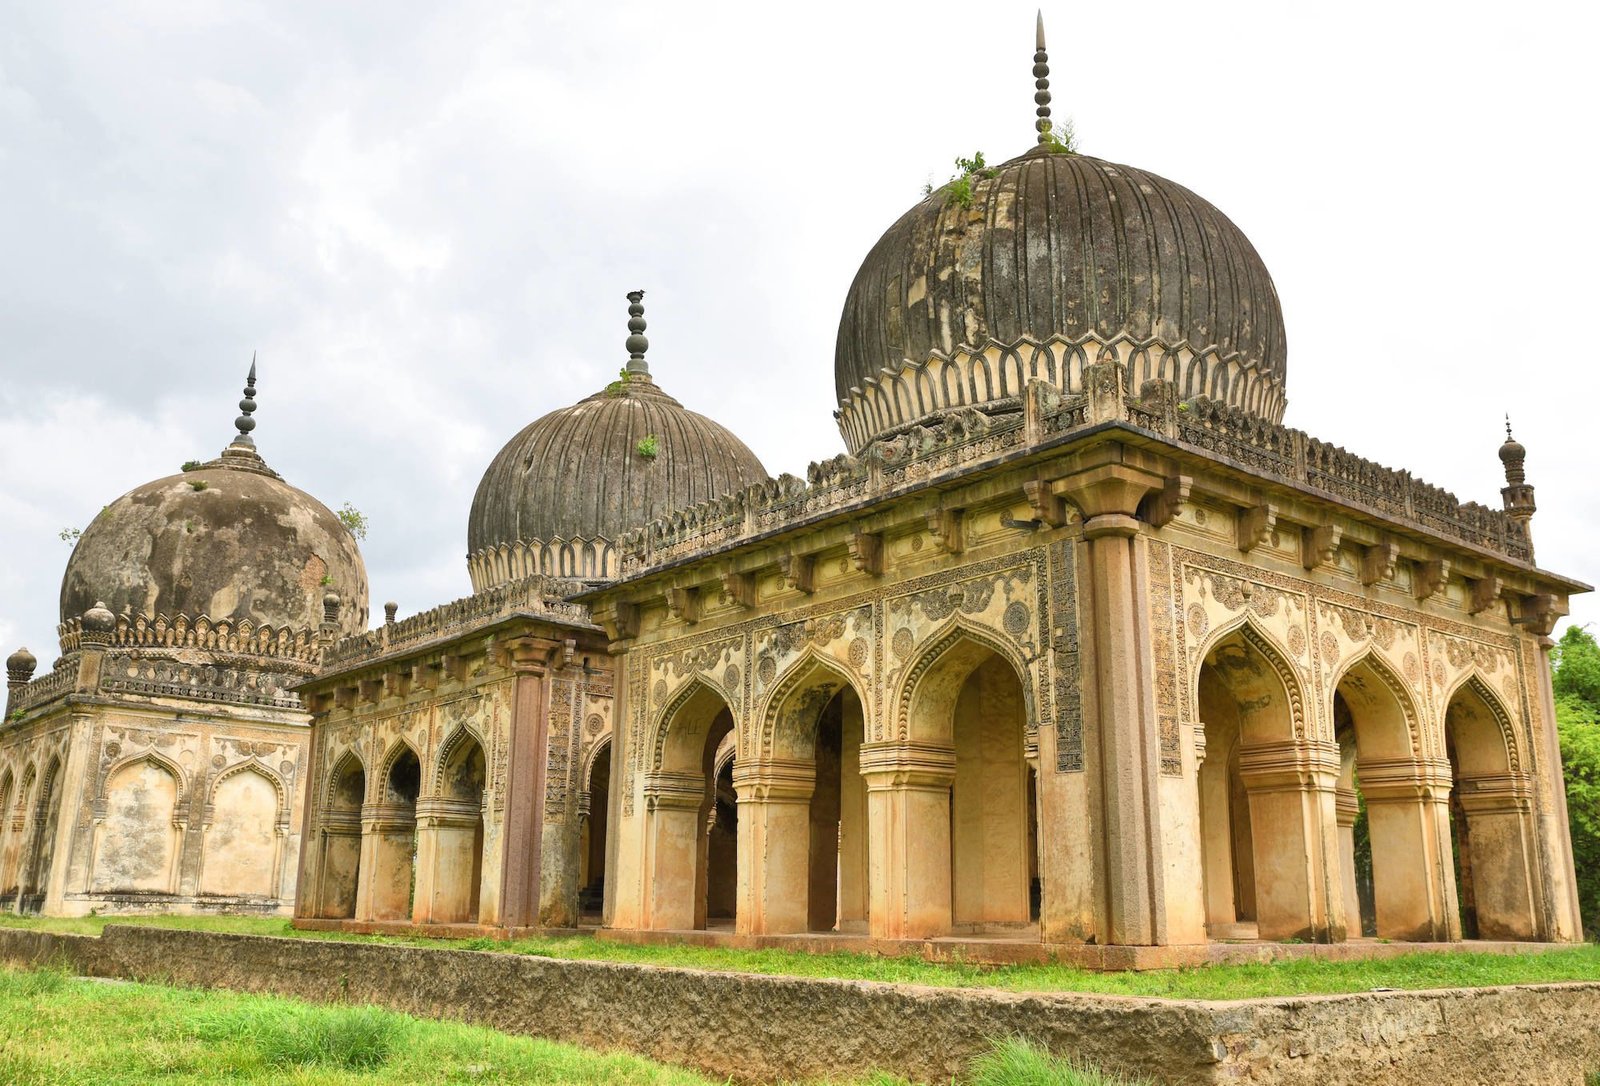 Whispering Tales of Grandeur: A Journey Through the Qutub Shahi Tombs